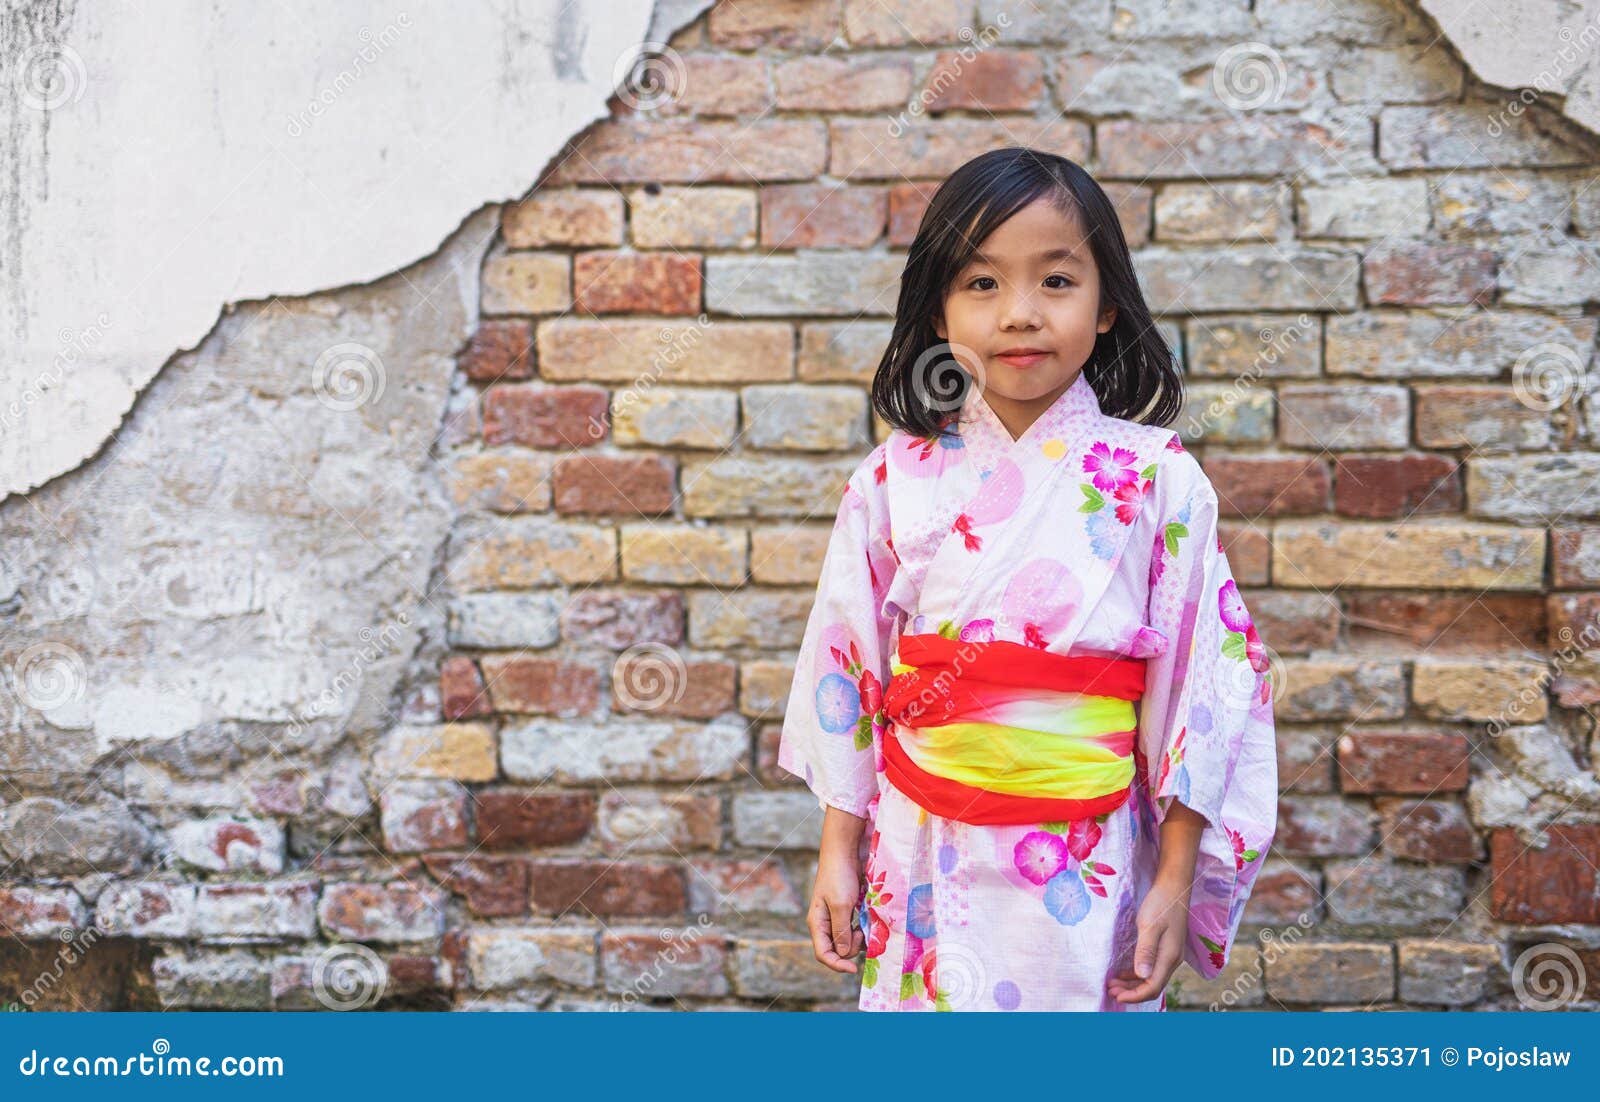 Portrait of Small Japanese Girl Wearing Kimono Outdoors in Town. Stock ...